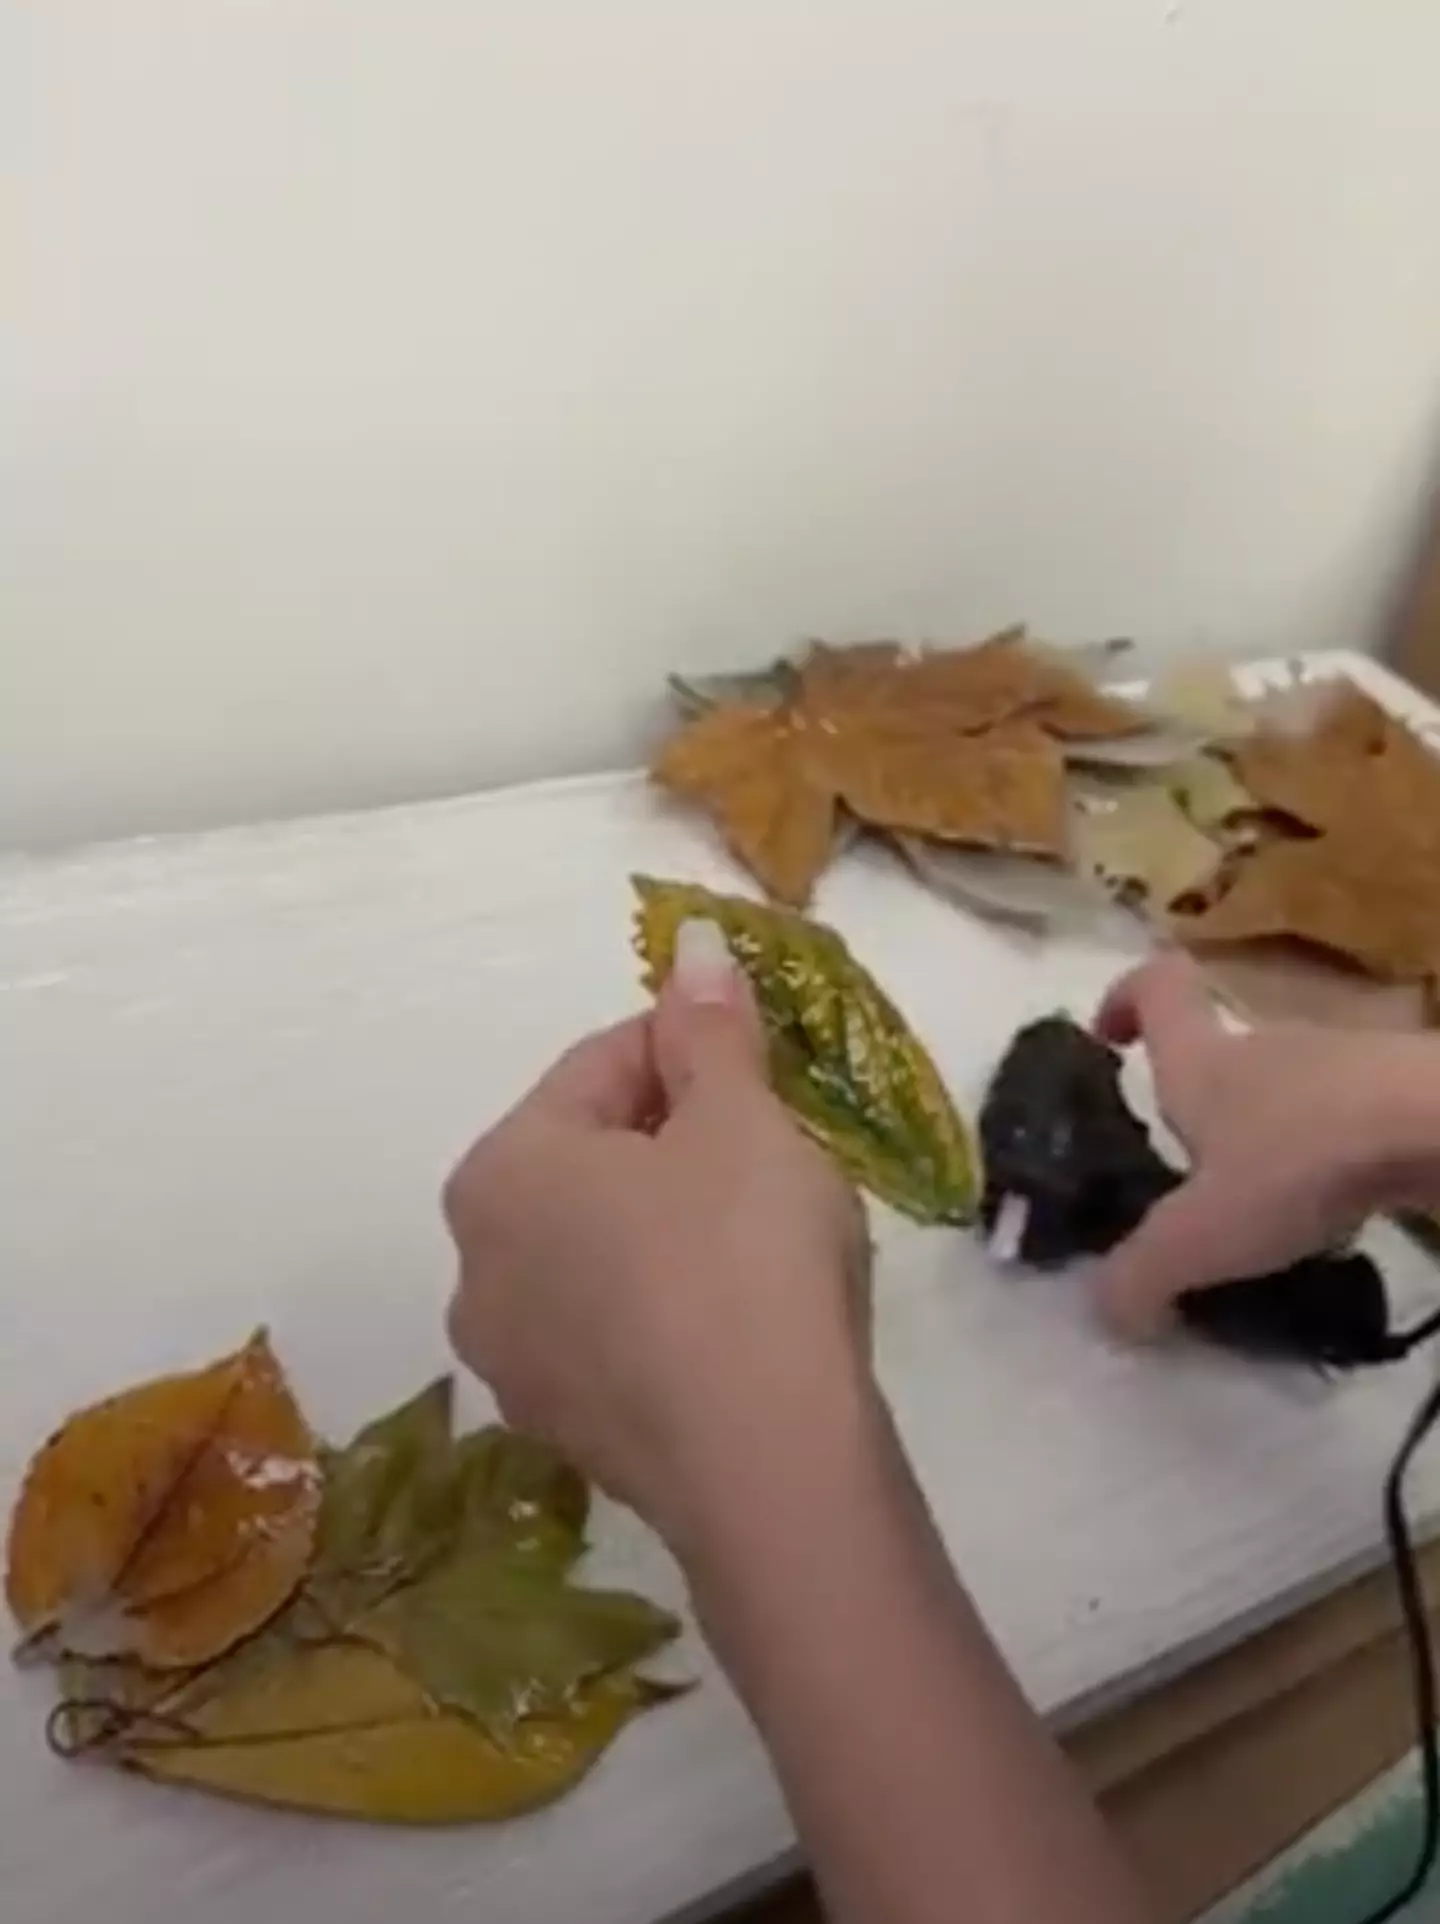 The model and one of her close friends froze the leaves and painted them with resin.